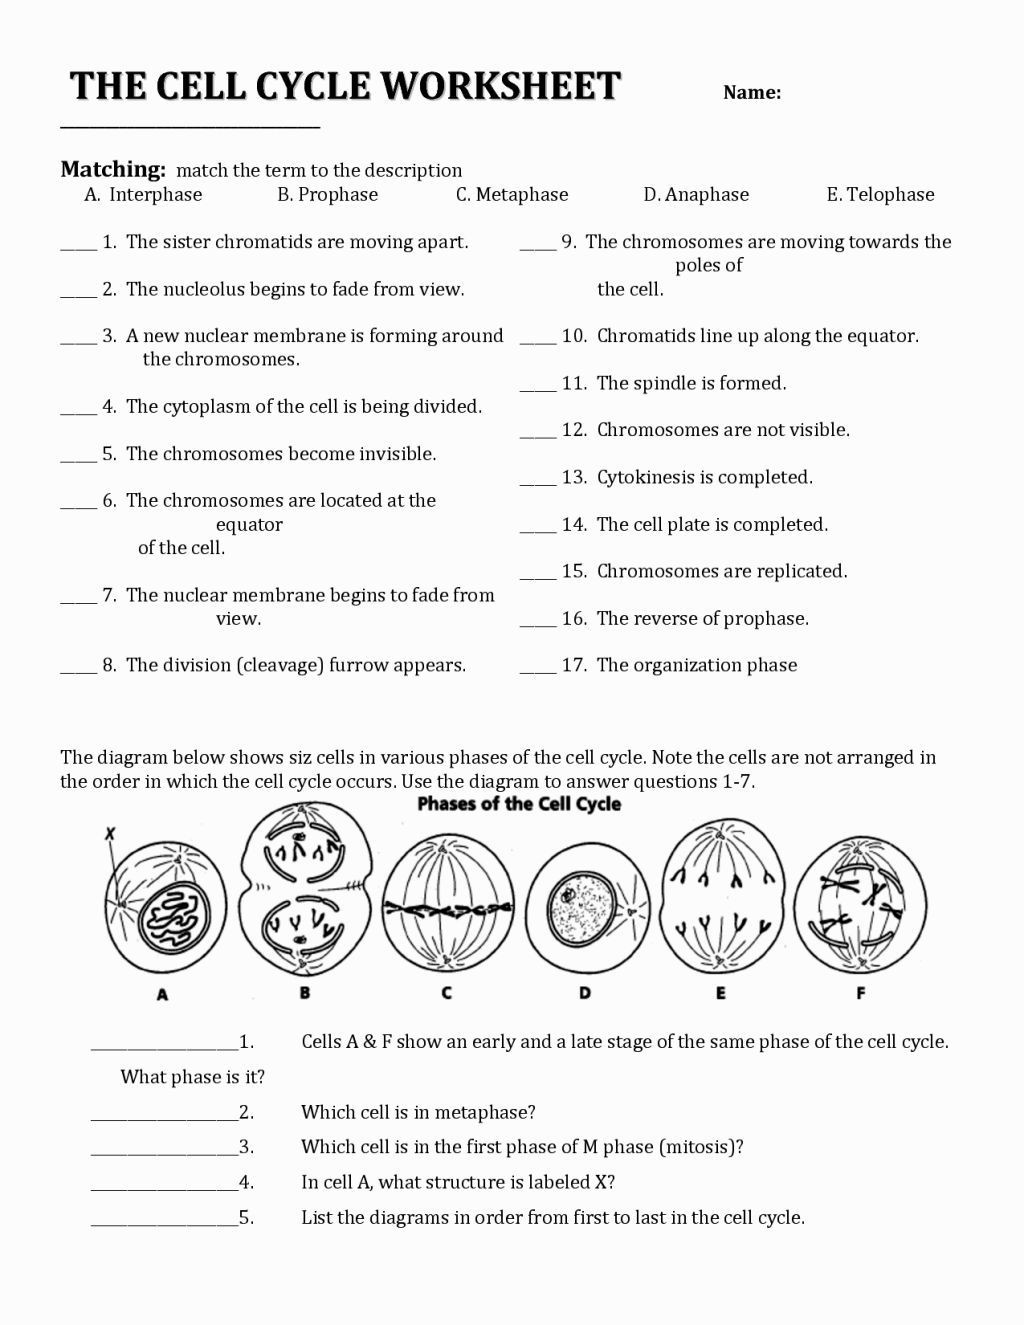 The Cell Cycle Worksheet the Cell Cycle Coloring Worksheet Key